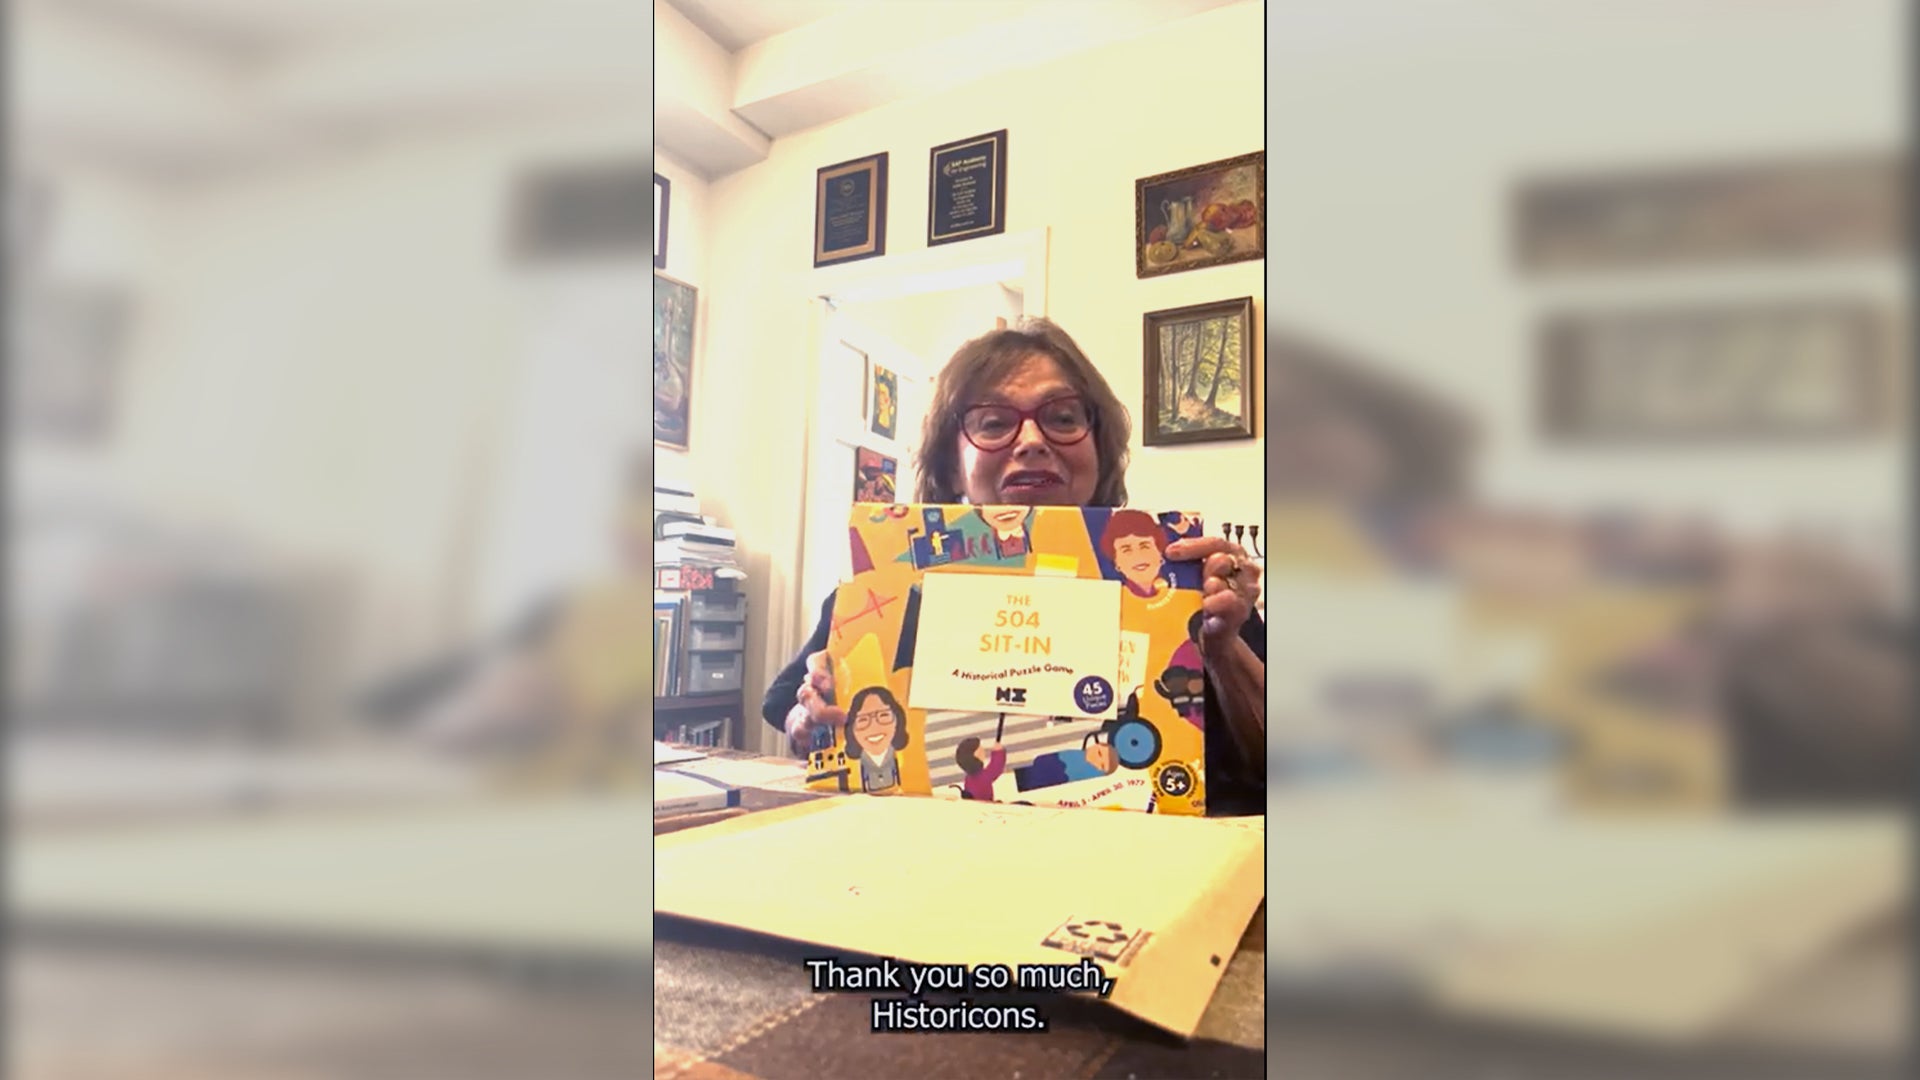 Load video: Disability rights icon Judy Heumann sits at a table and unboxes The 504 Sit-In puzzle game from Historicons. She removes the puzzle from a sleeve and talks about the people featured on it, comments on the colorful yellow puzzle, and thanks Historicons for bringing disability history to the forefront.